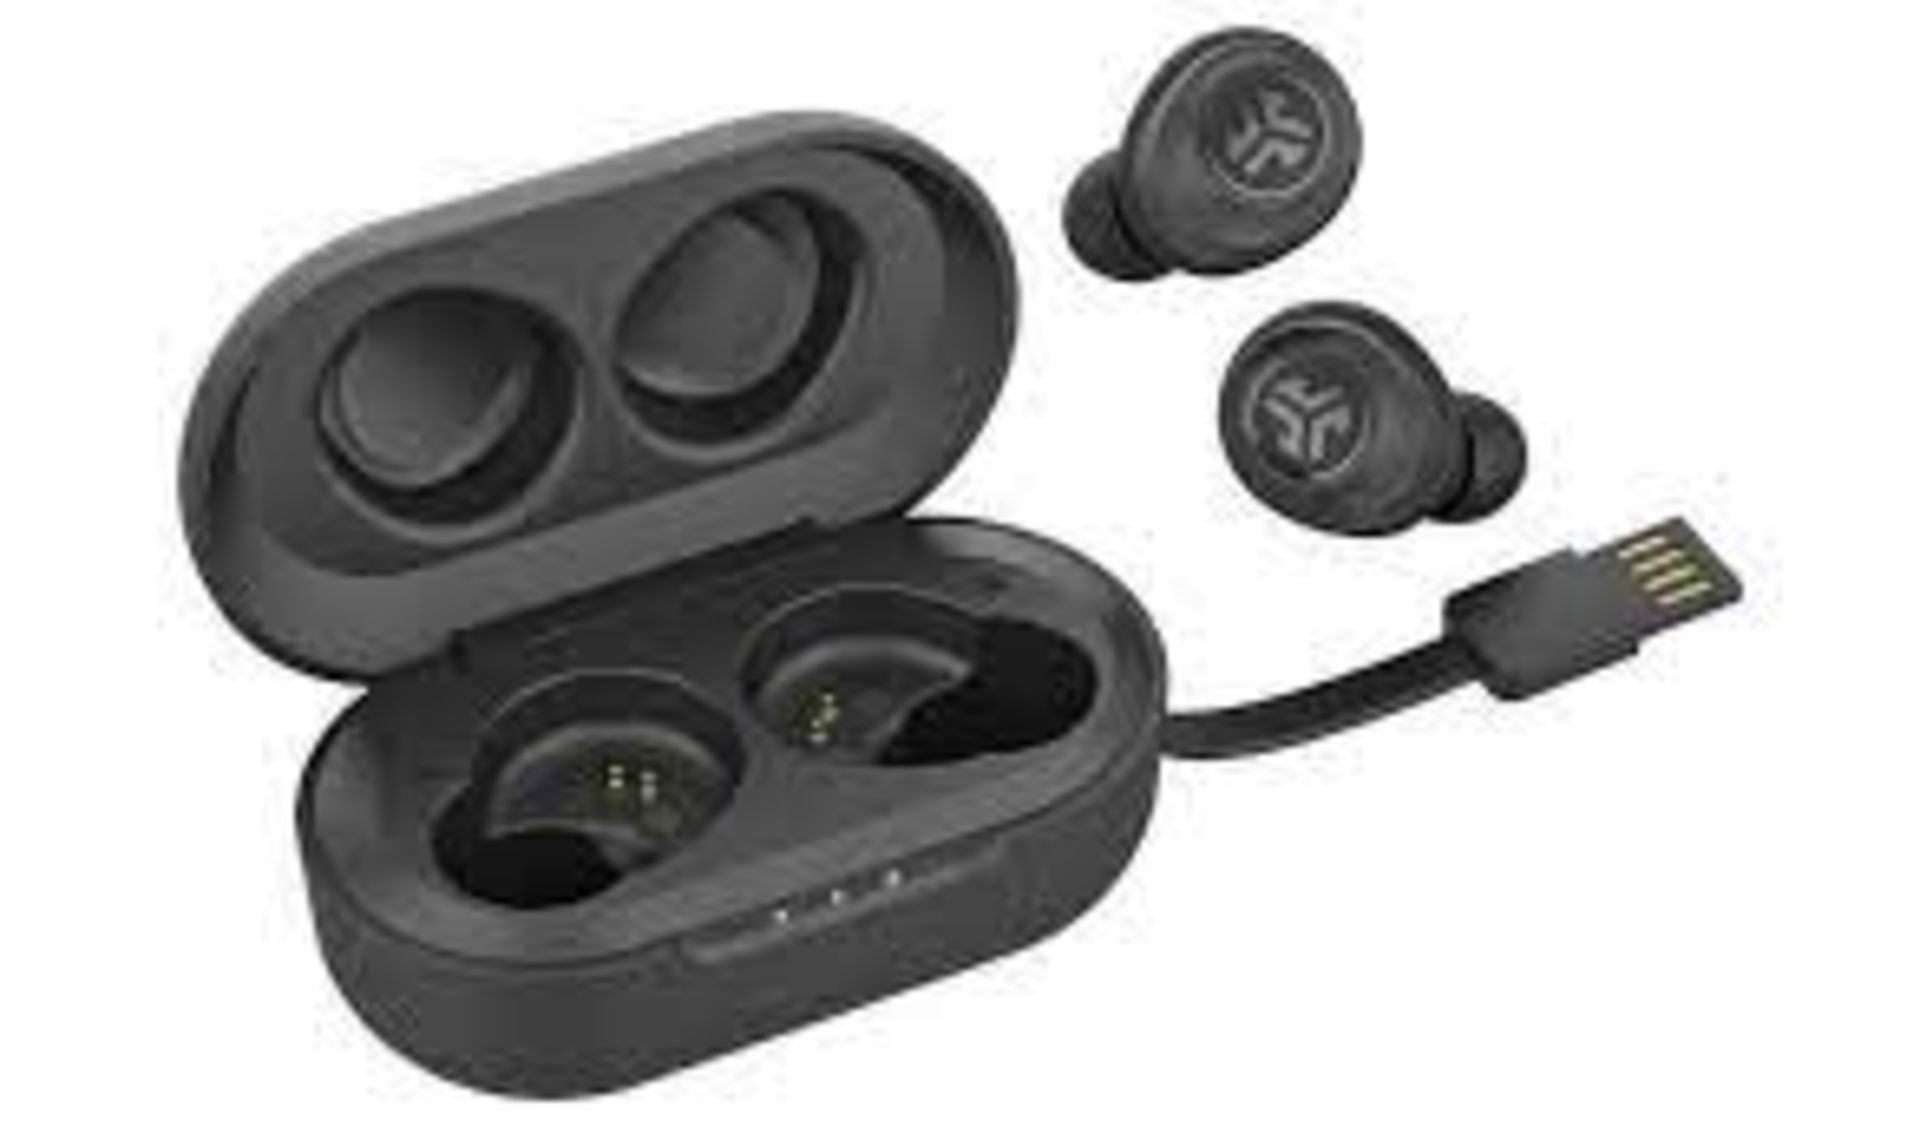 Jlab Audio Jbuds Air And Tw Wireless Bluetooth Noise-Cancelling Earphones - Black - Image 3 of 3